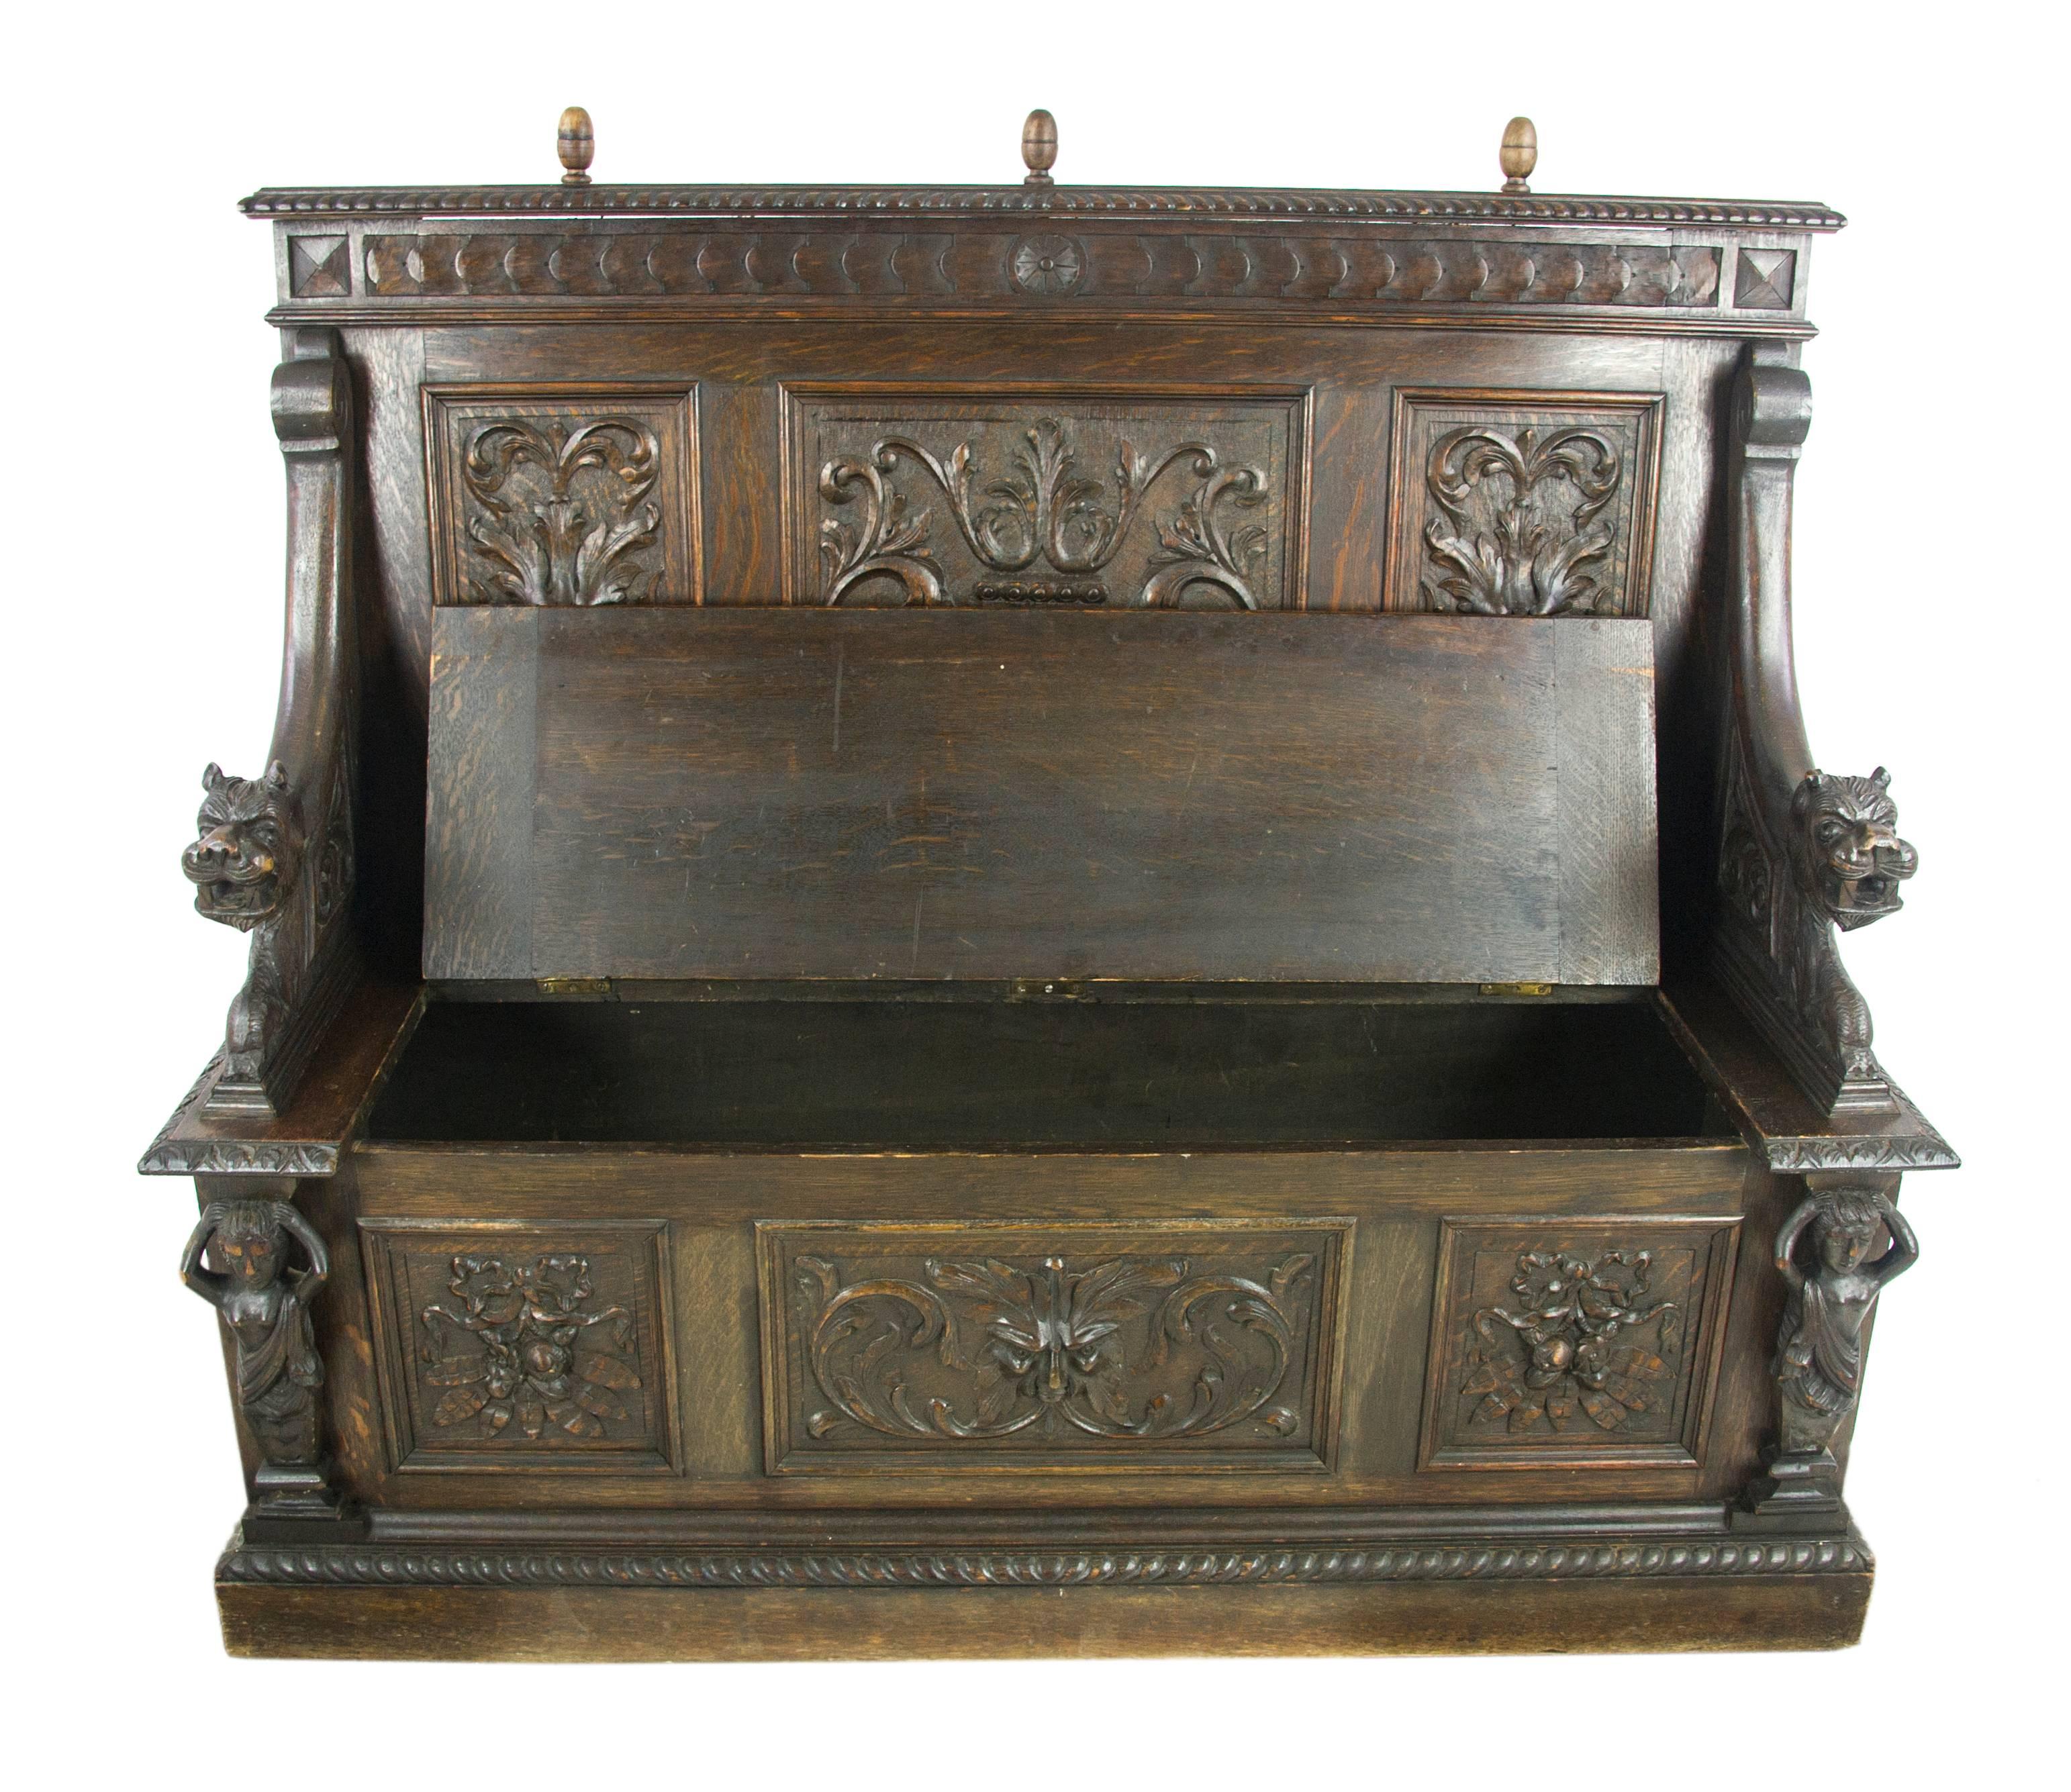 Antique Hall Bench, Entryway Furniture, Carved Oak Settle, Lift Up Seat, Scotland 1880, Antique Furniture, B1003

Scotland, 1880
Solid Oak Construction
Original Dark Oak Finish
Carved Top Rail with Three Finials
Greenman Mask to the back
Base